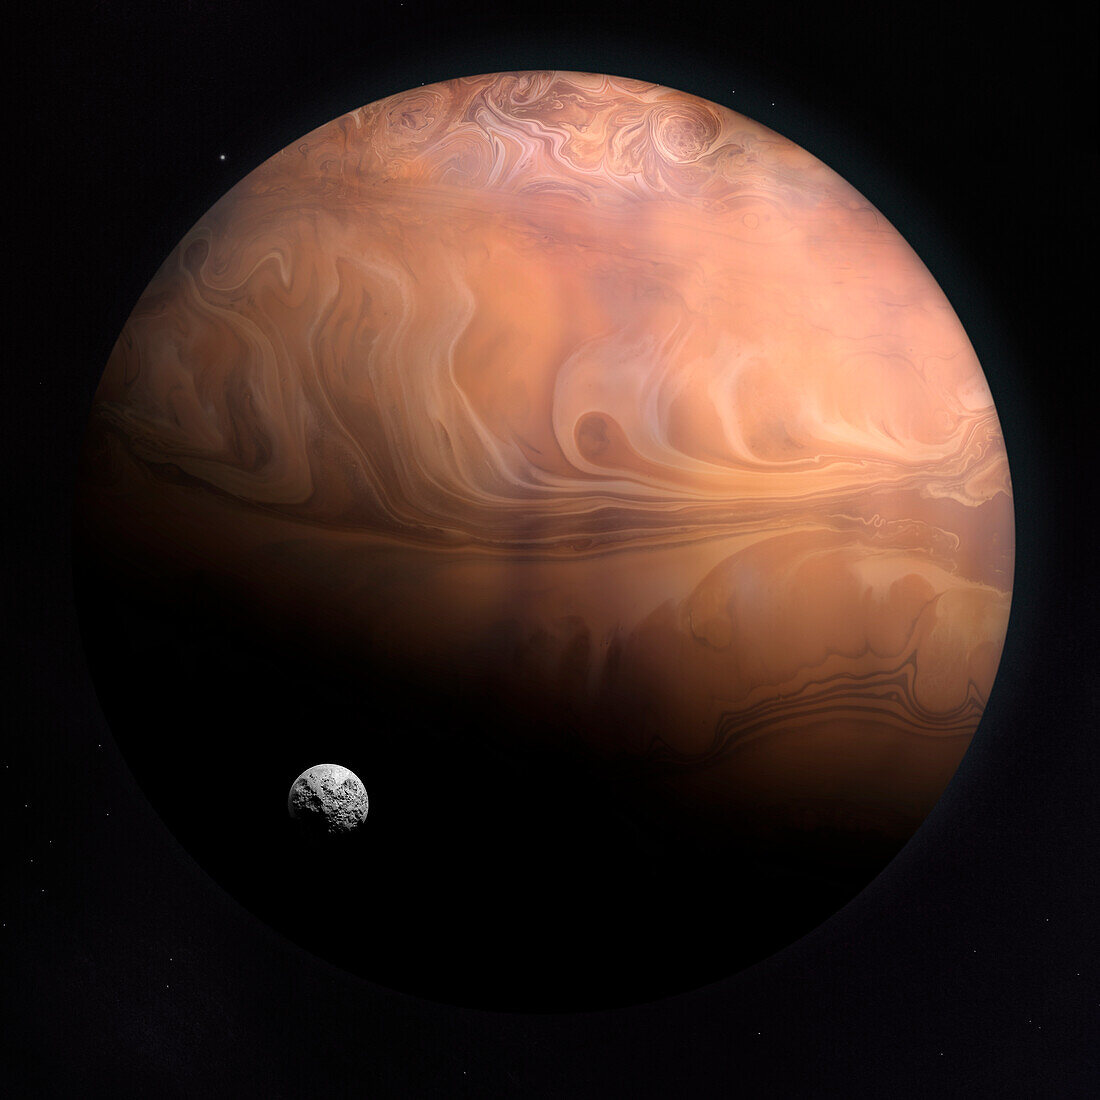 Exoplanet gas giant with rocky moon, composite image